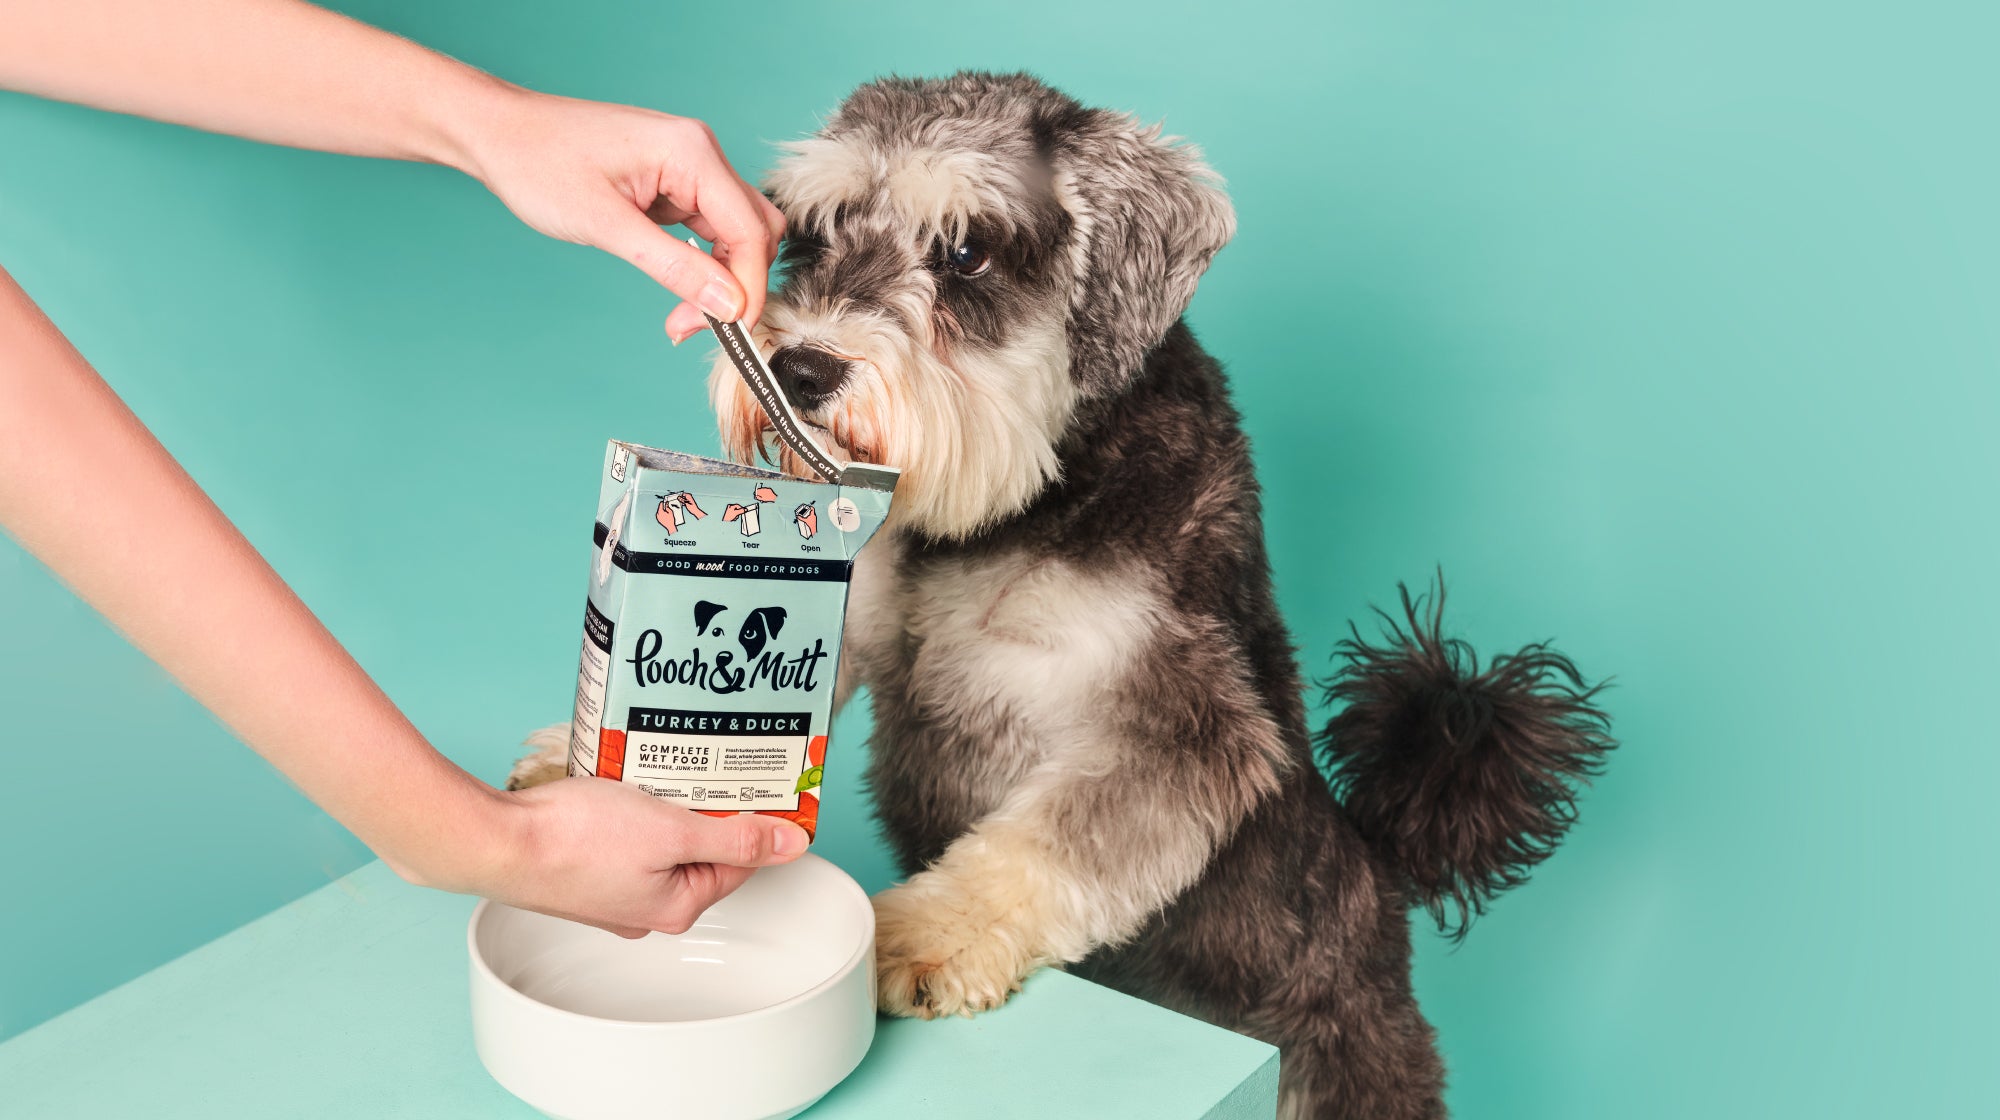 schnauzer dog being spoonfed a carton of pooch and mutt wet food